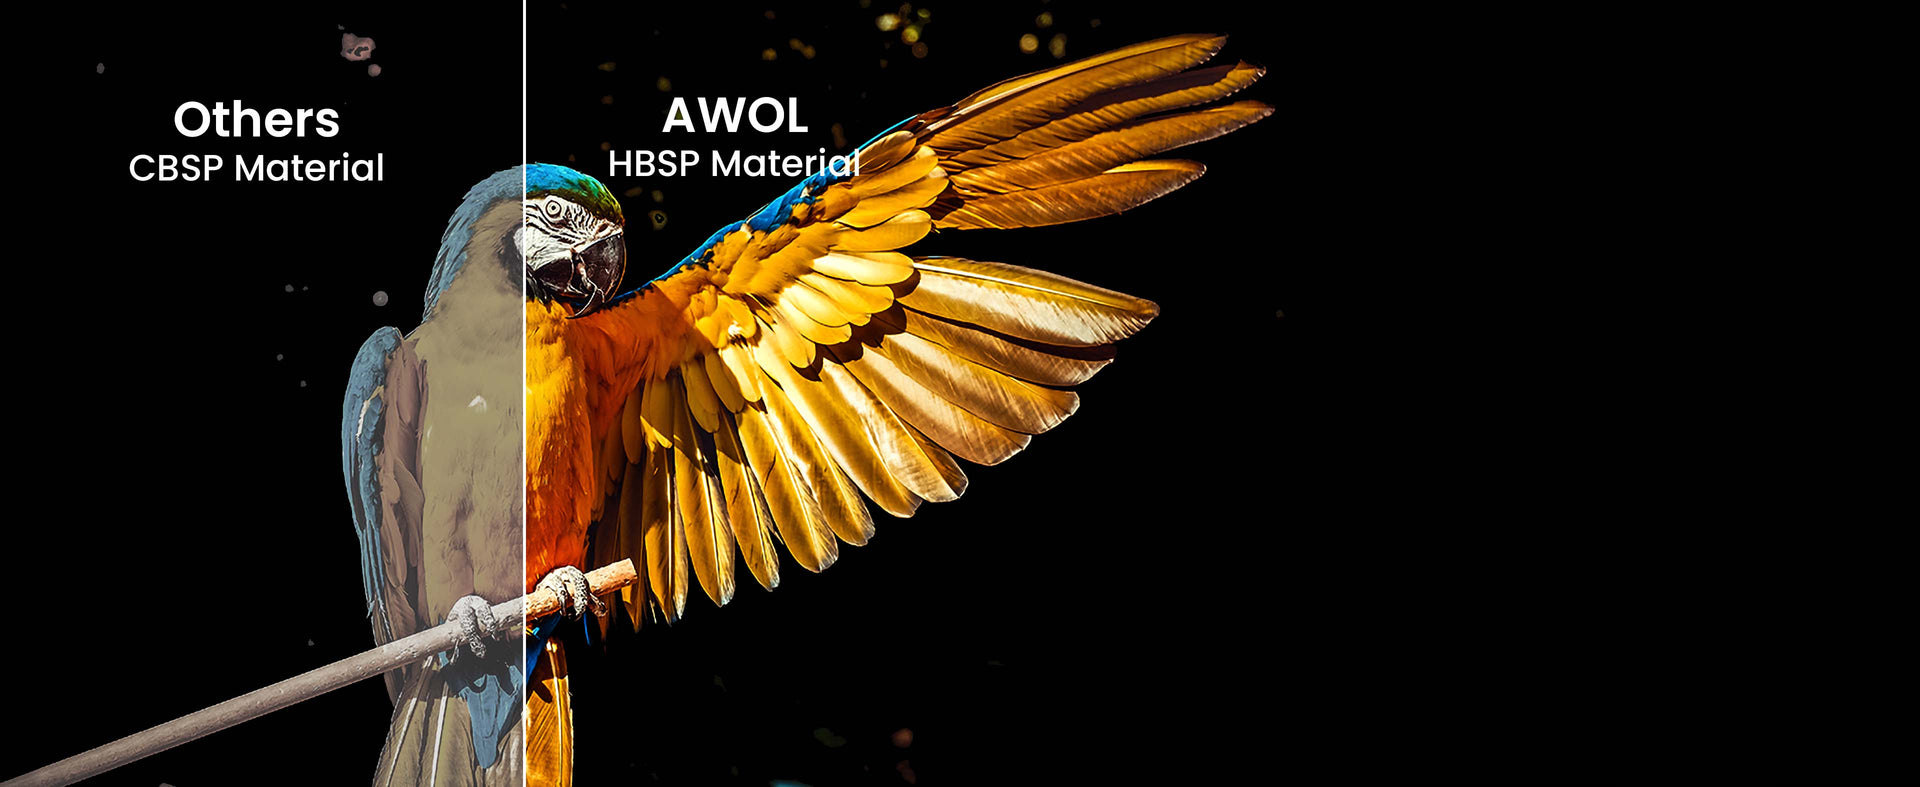 A comparison showing the 80% image quality improvement of AWOL Vision Cinematic ALR Screen using HBSP material.